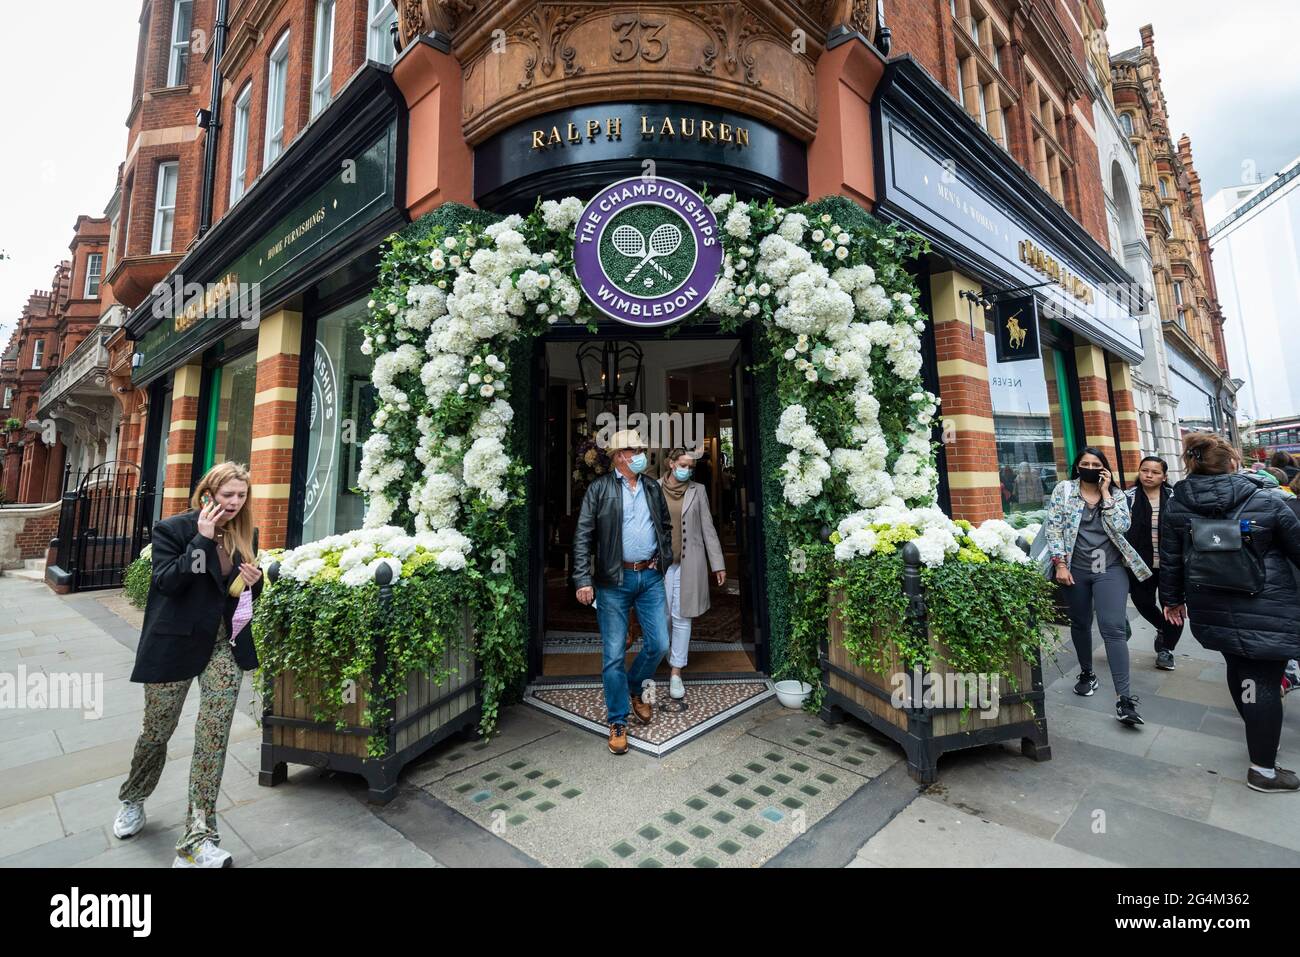 London, UK. 22 June 2021. People pass the exterior of the Ralph Lauren  store in Sloane Square, decorated ahead of this year's upcoming Wimbledon  tennis championships at the All England club. Ralph